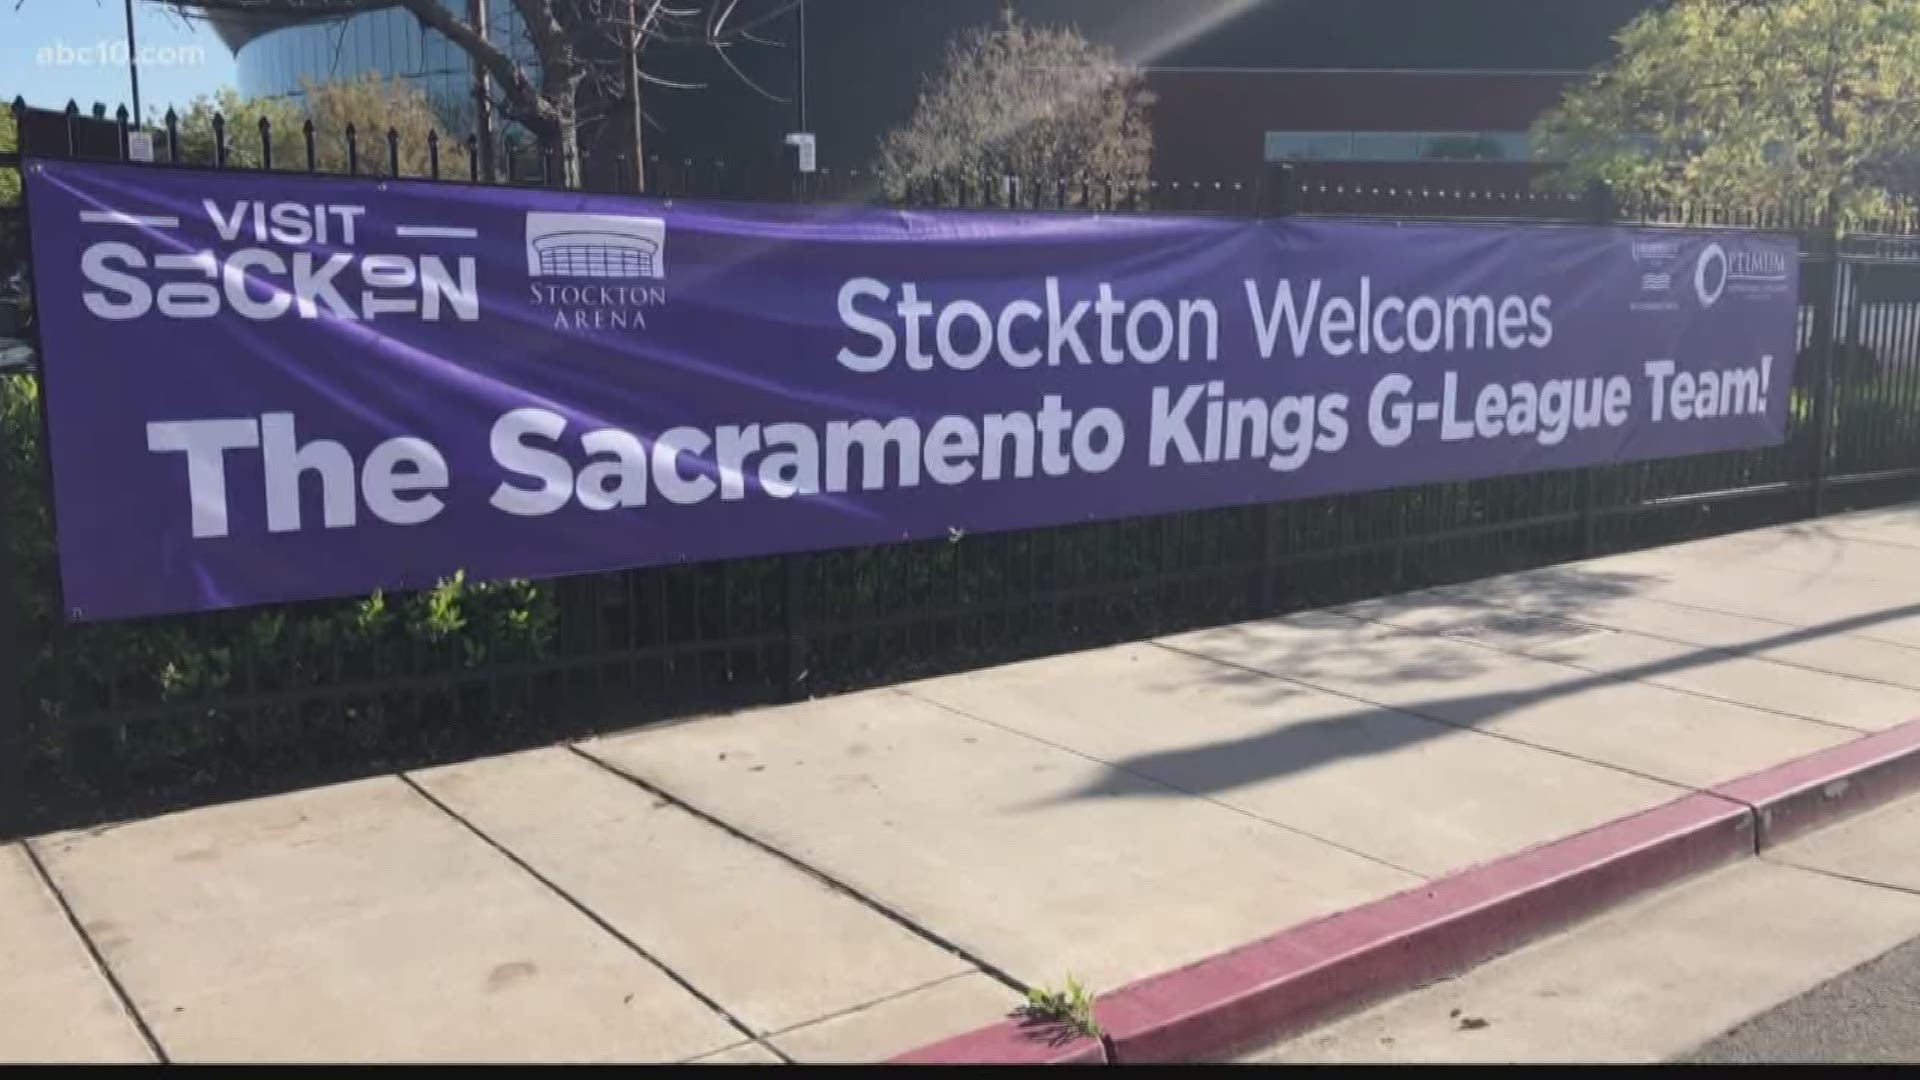 A week after news broke the Sacramento Kings intended to move their minor league affiliate from Reno to Stockton the city made it official last night.